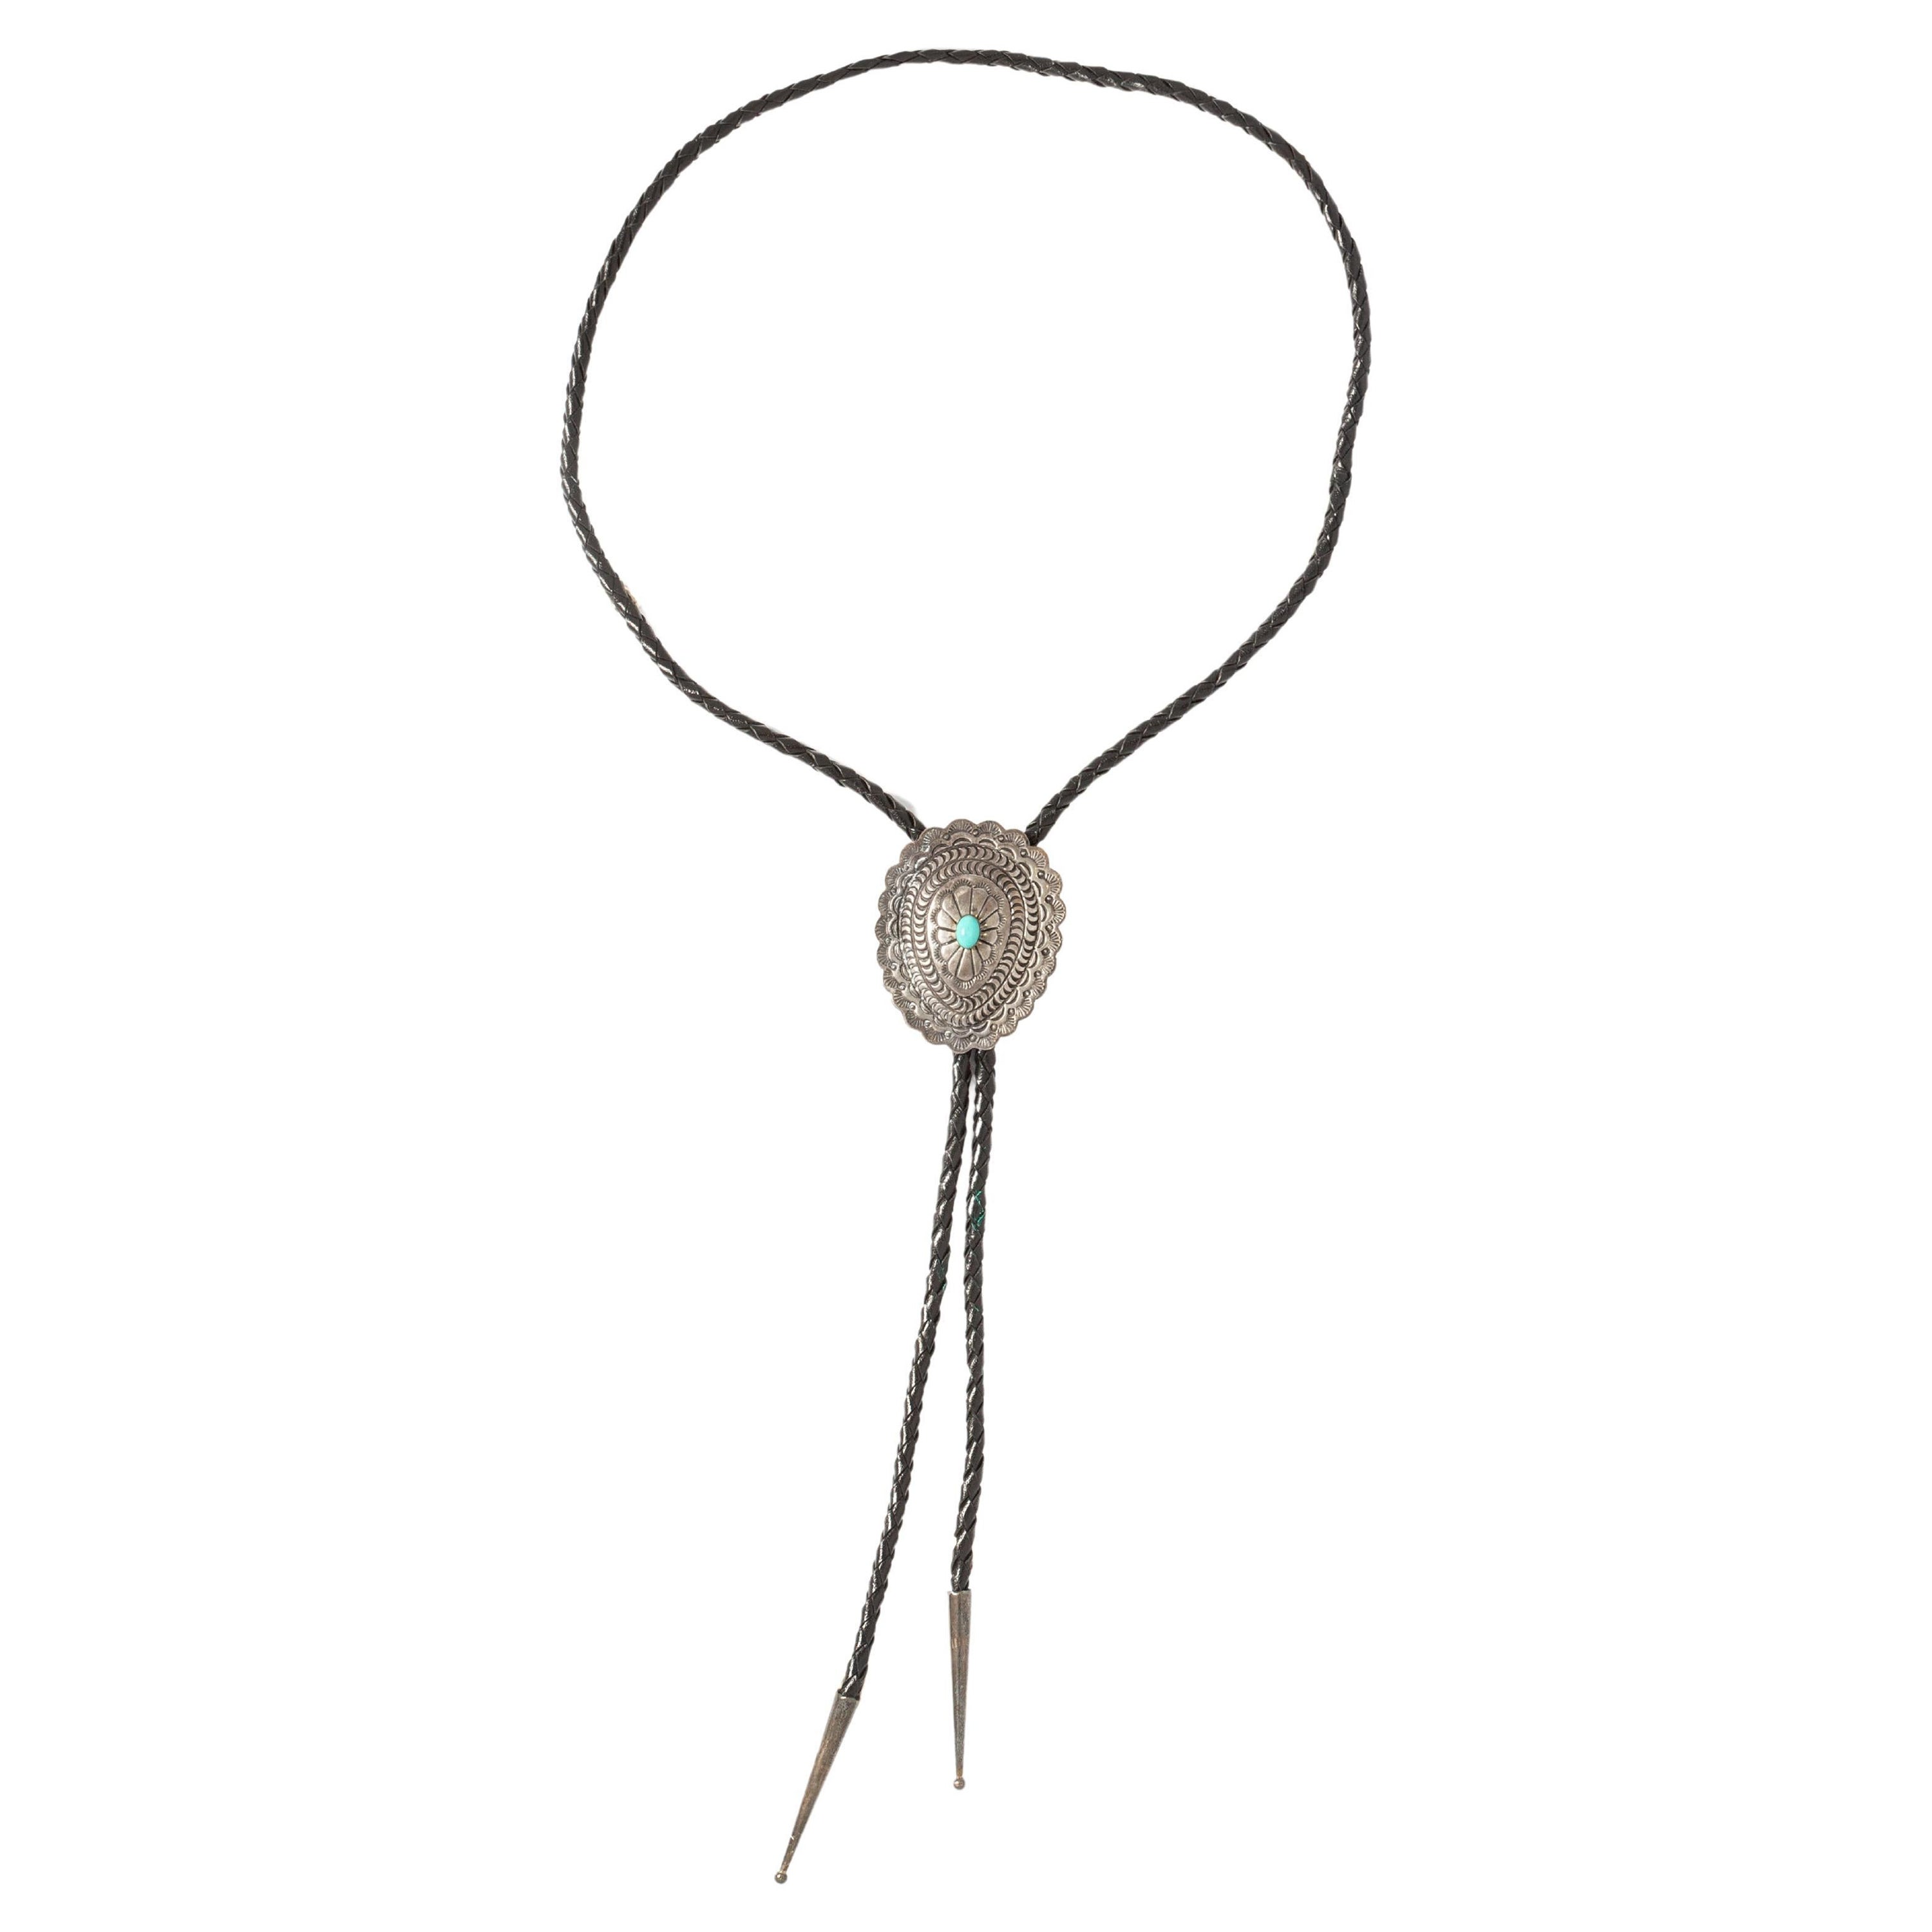 Bolo Tie silver-tone concho and tips.
One Turquoise (not tested) centering the concho.

Weight. 34.44 grams.
Length Pendentif: 5cm.
Width Pendentif: 4.20 cm.
Length Chaine: 96 cm.